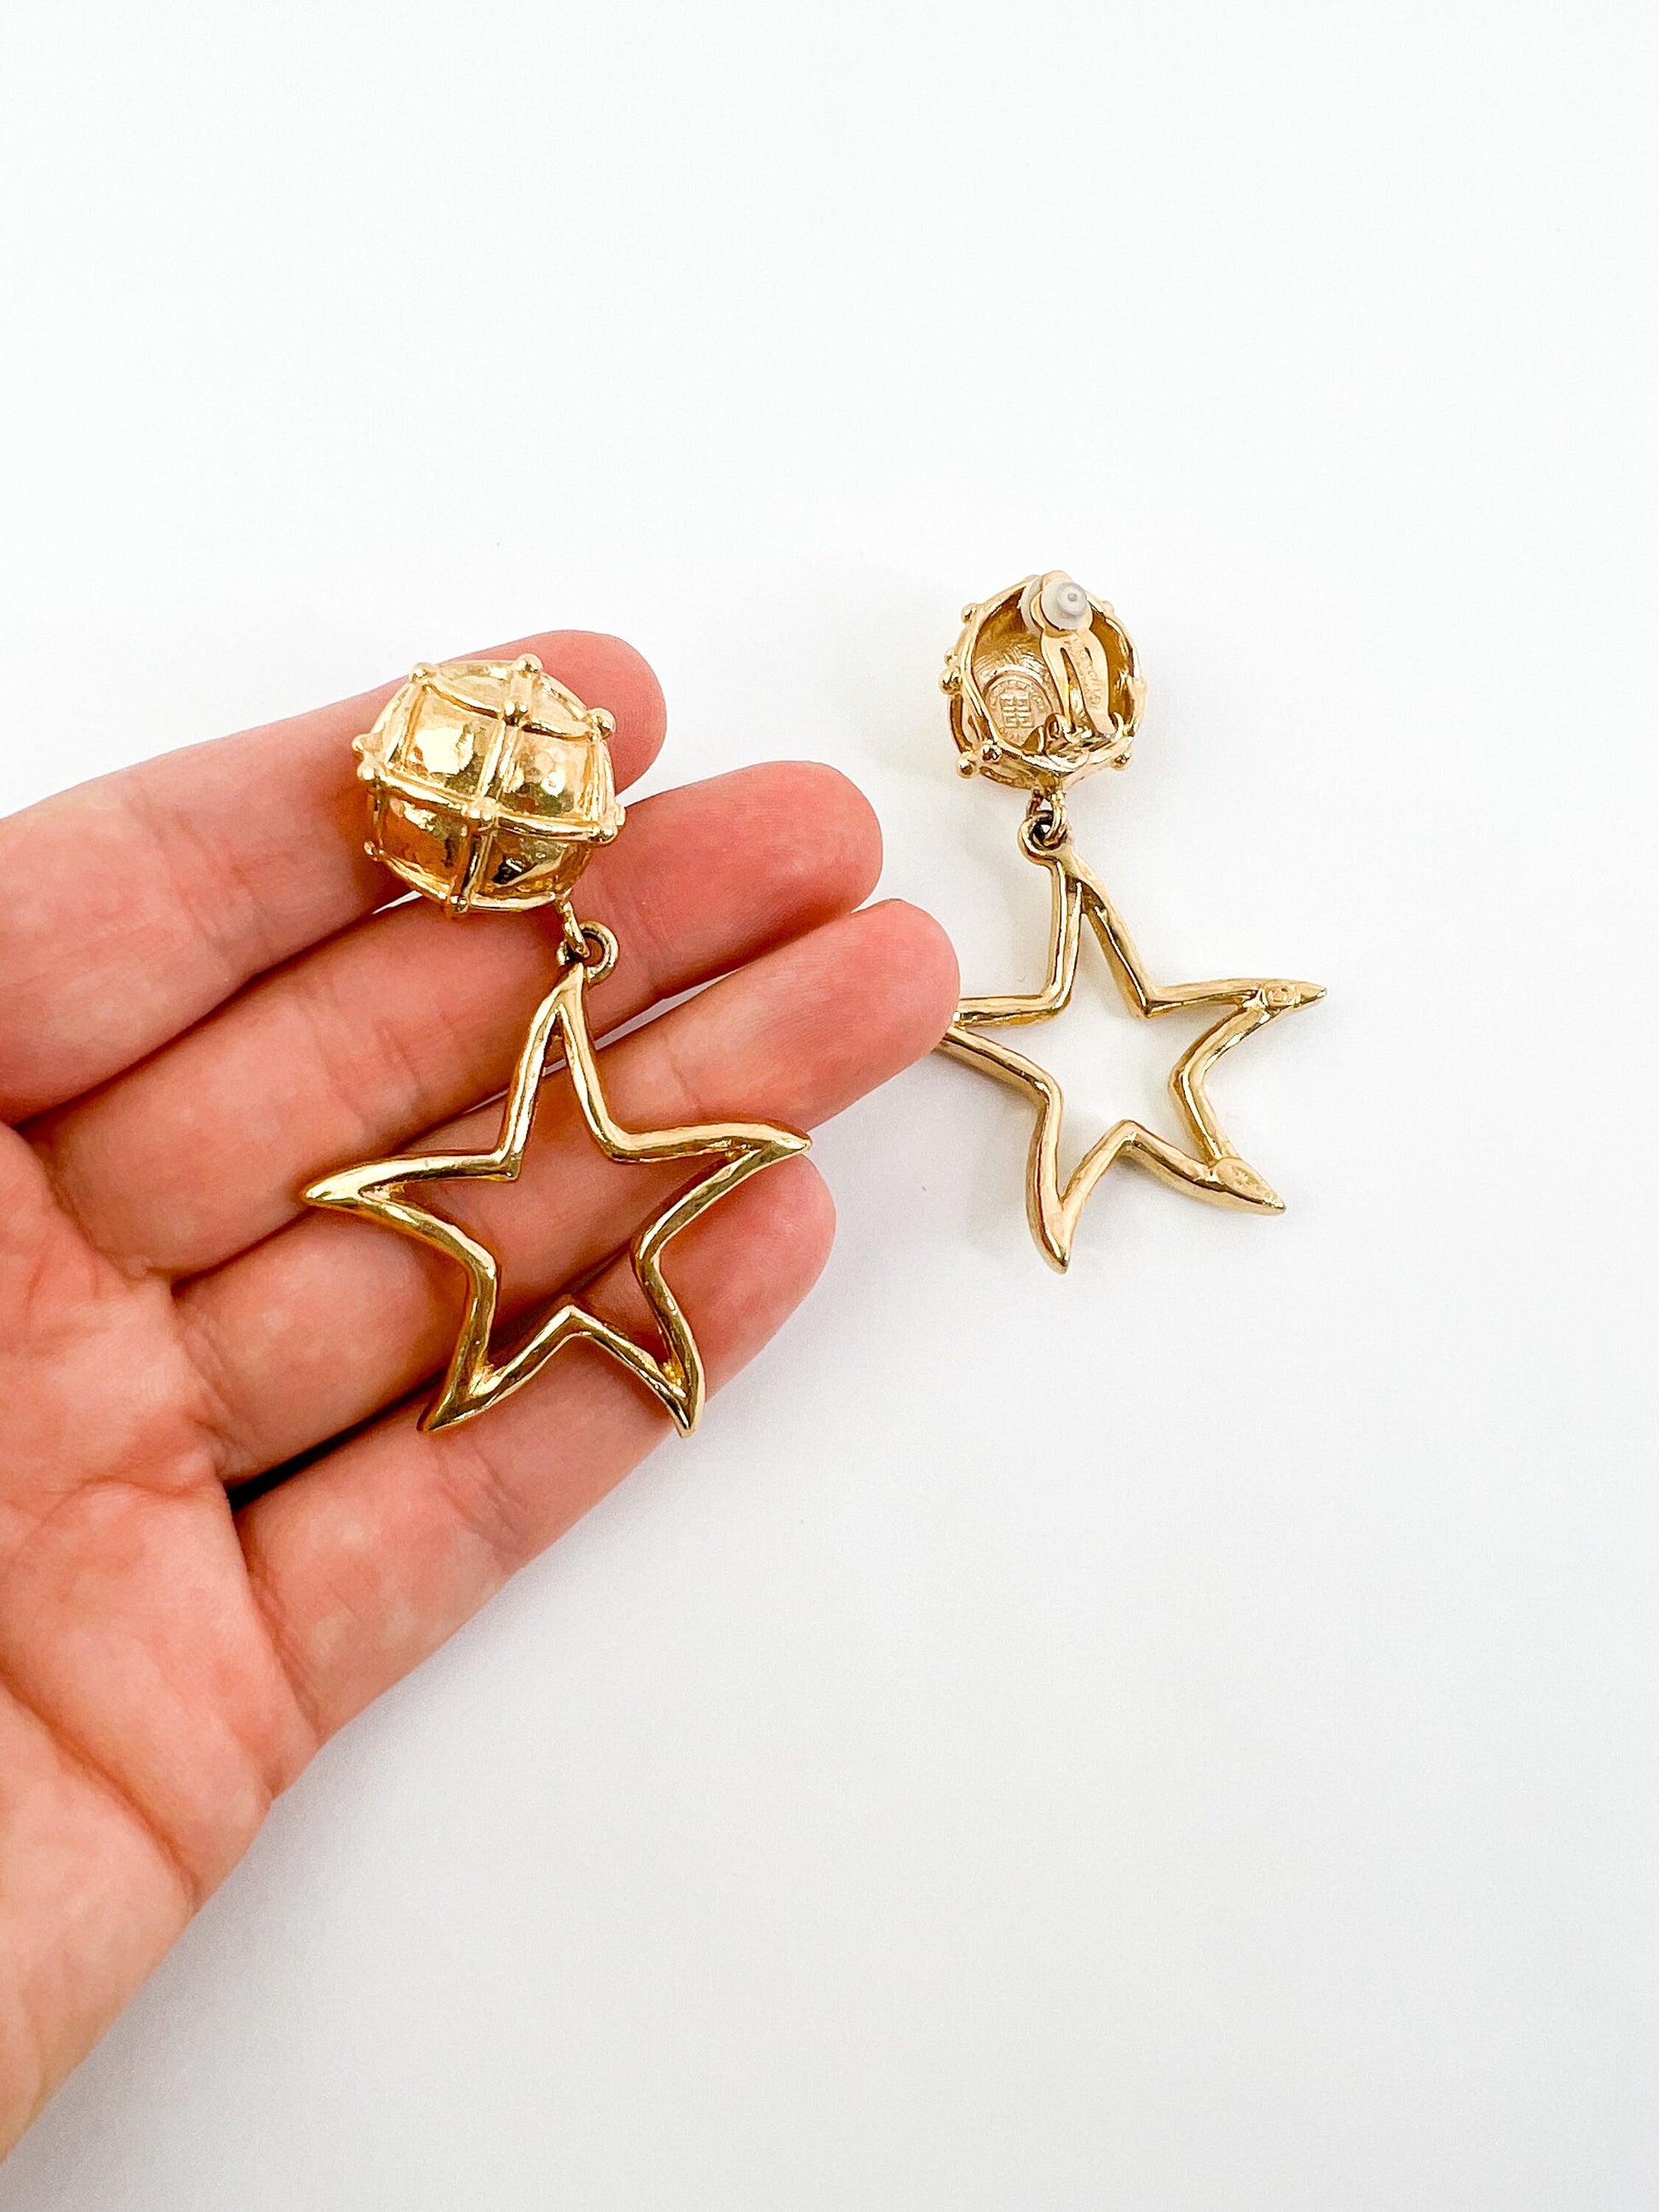 Vintage Givenchy Earrings, Vintage Givenchy Star Earrings, Givenchy dangle earrings , Vintage Givenchy jewelry, Givenchy collectible